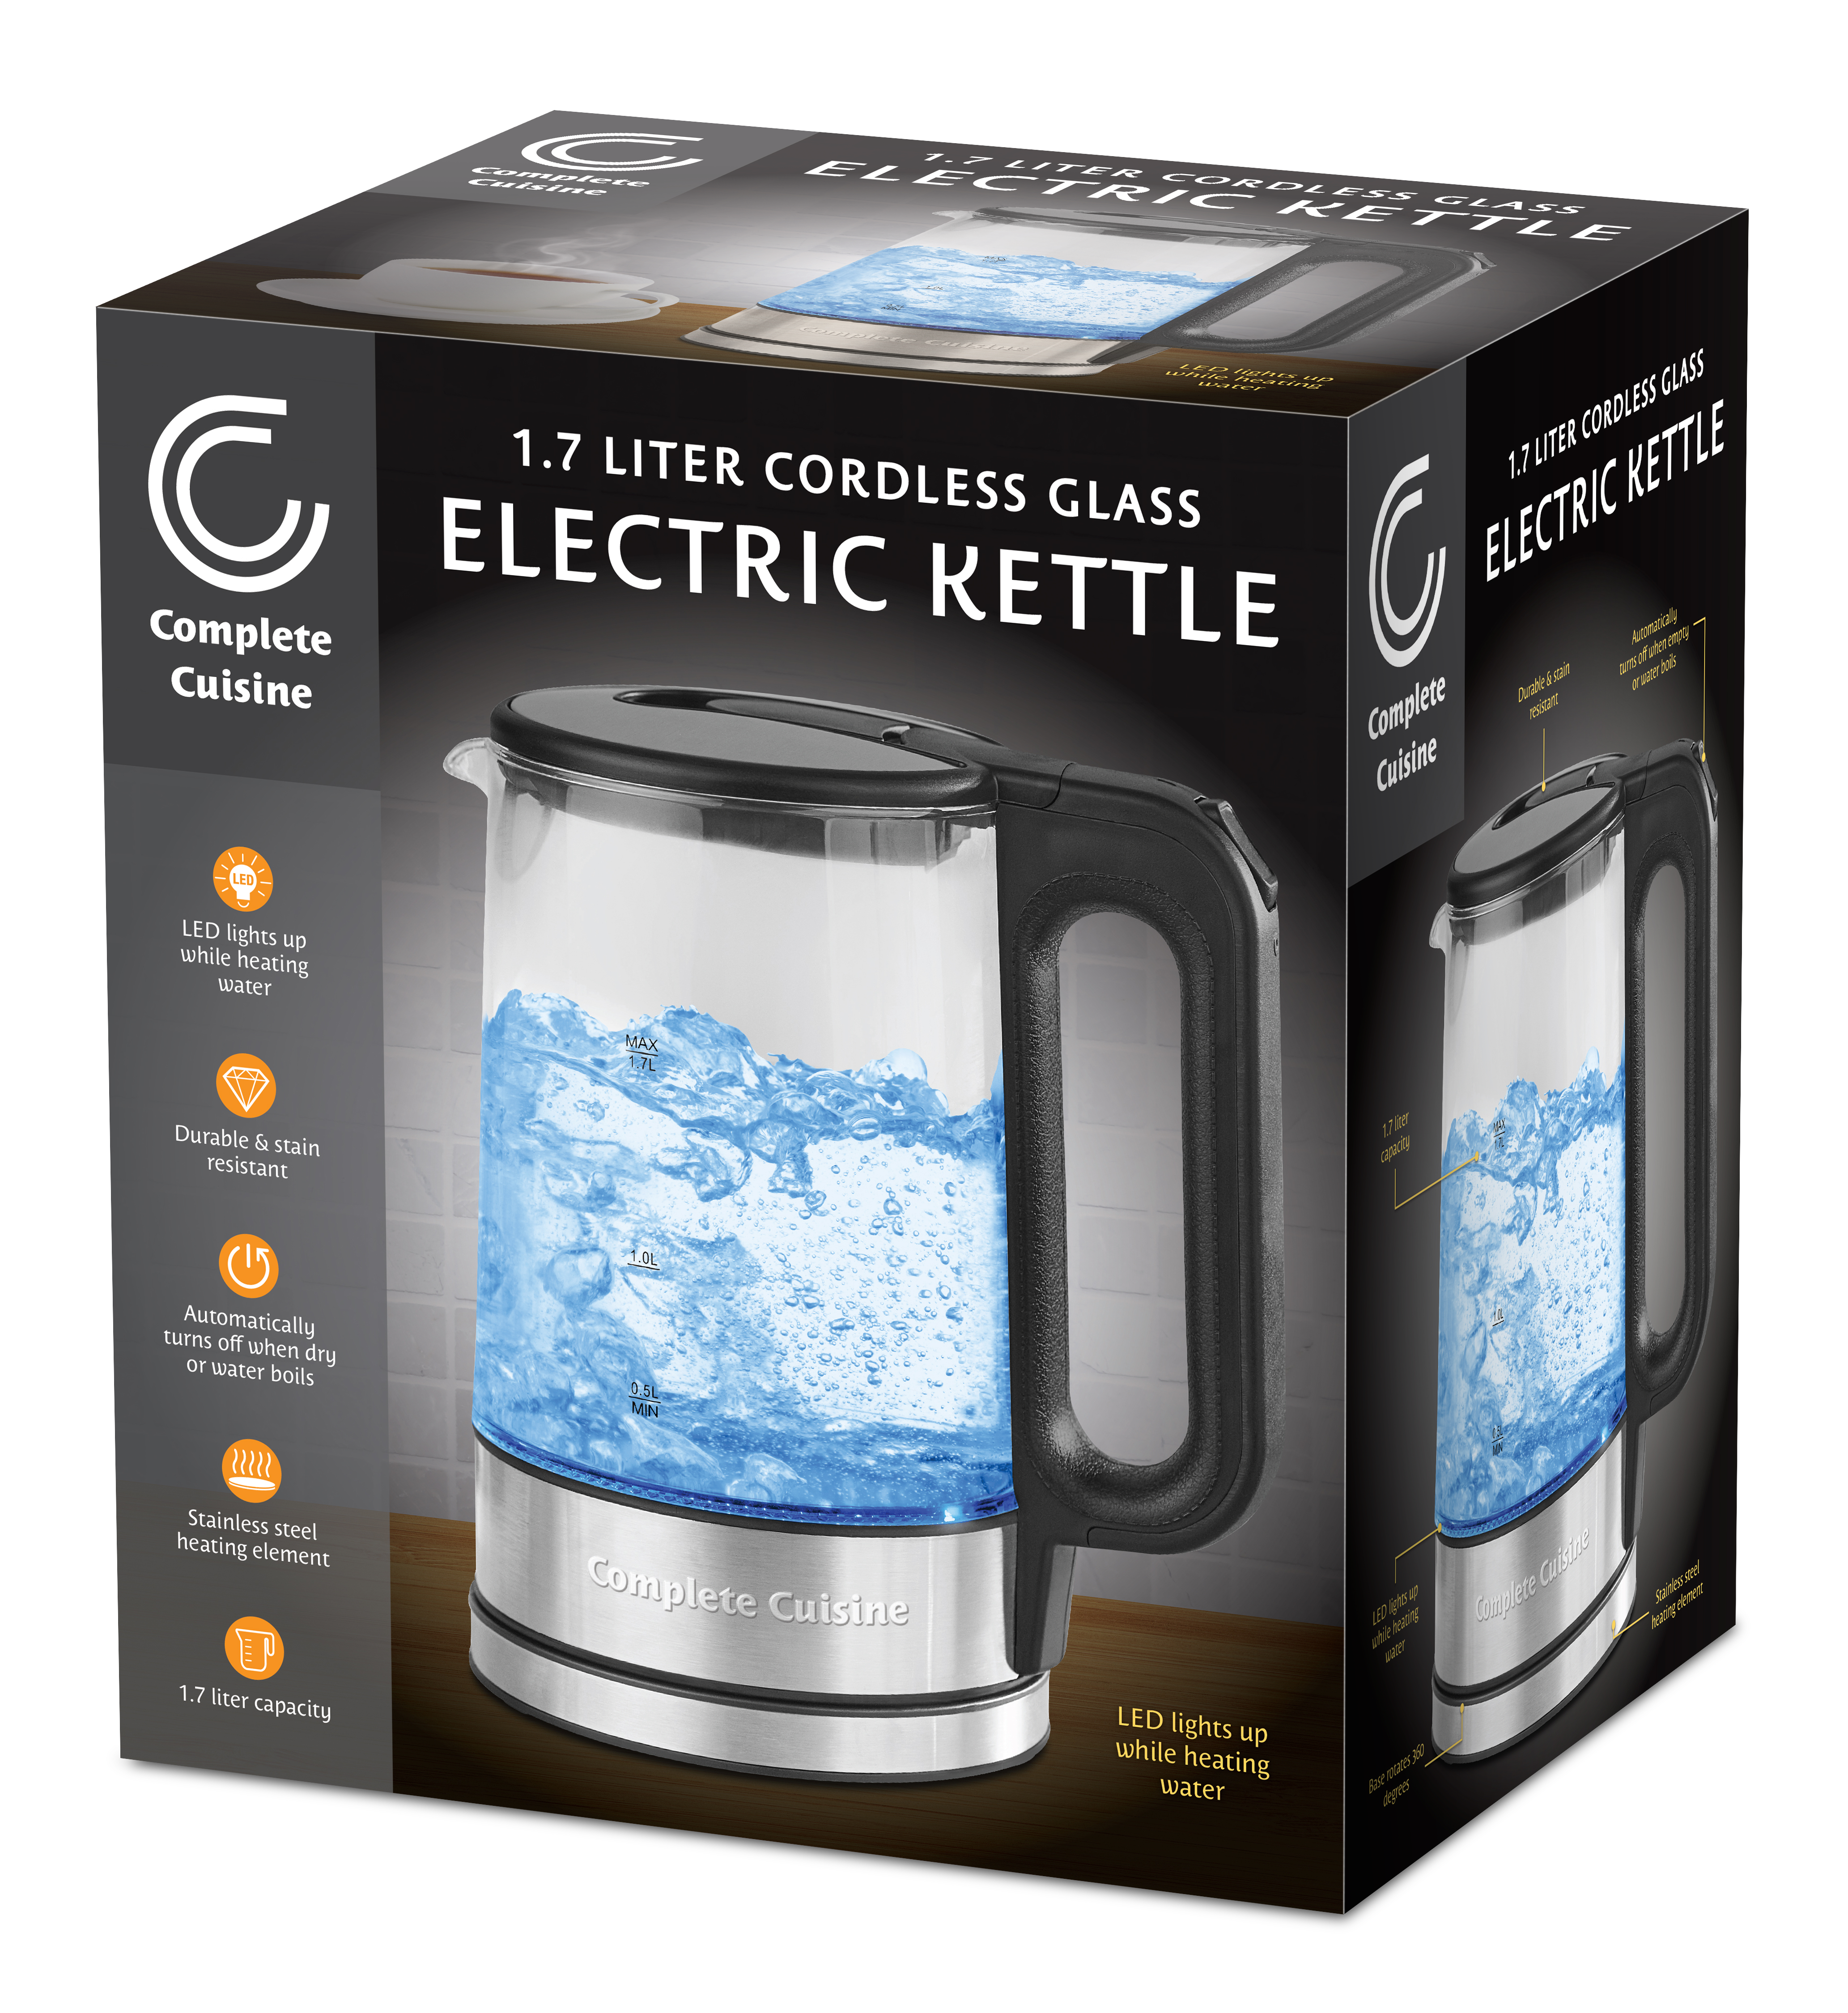 Cordless Electric Glass Kettle w/ LED Light